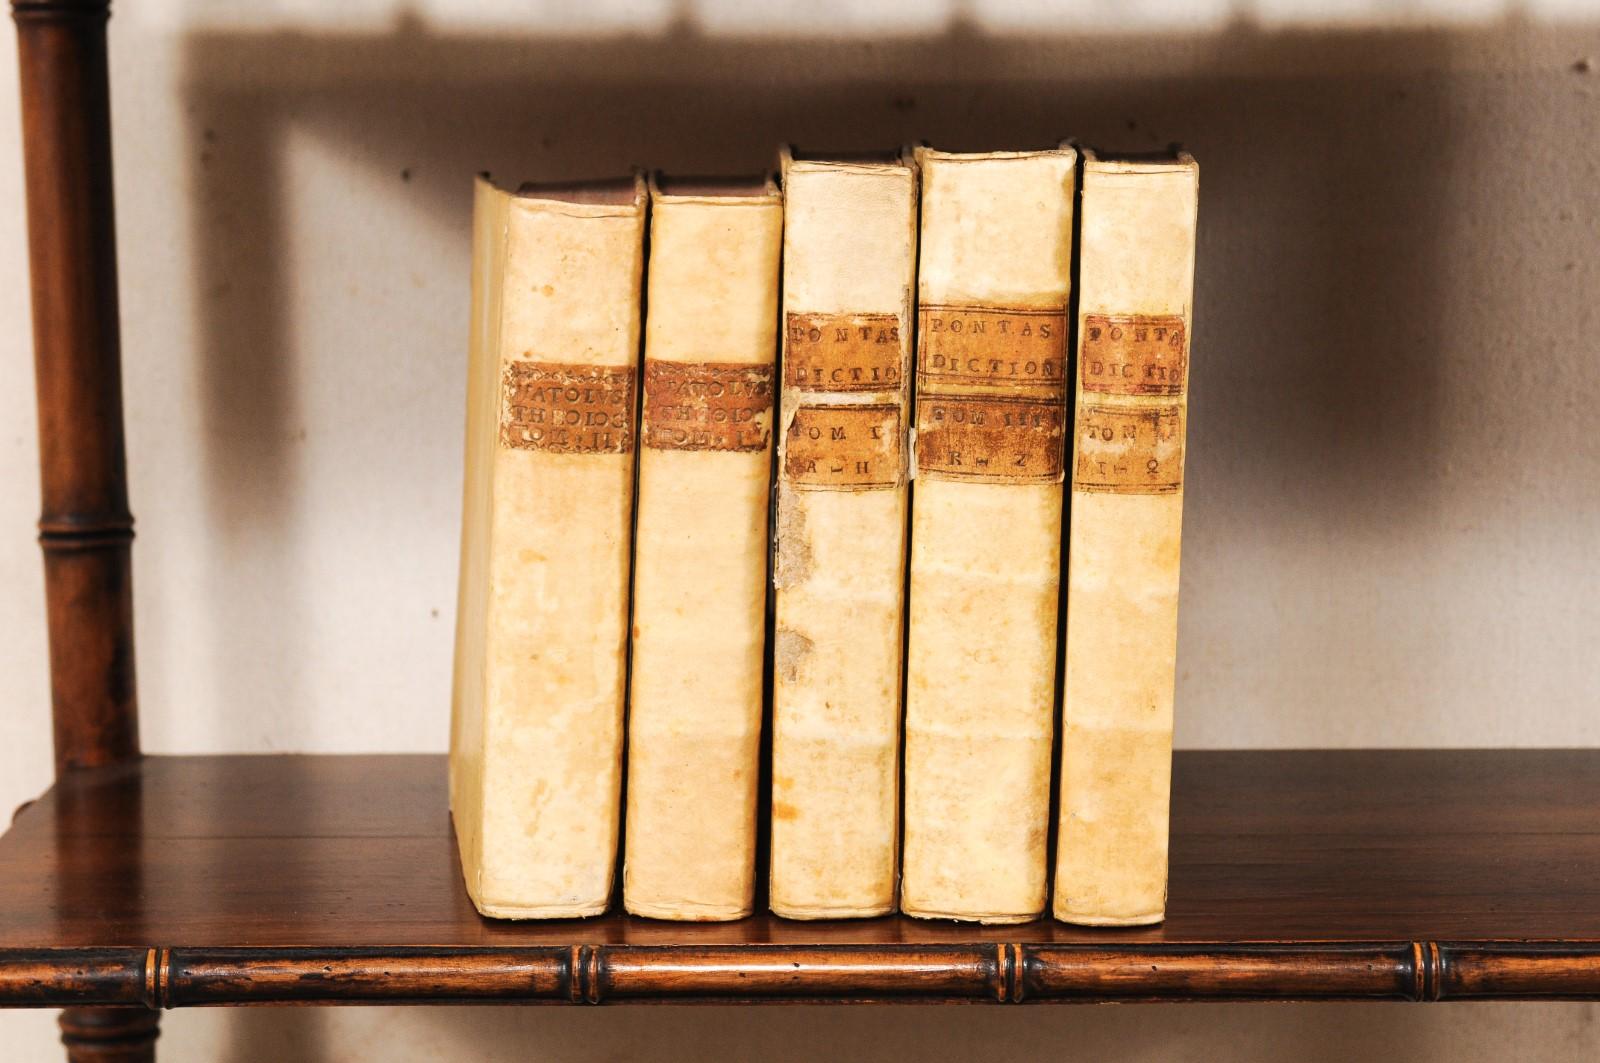 A handsome collection of 5 Italian 18th century vellum bound books. This set of religious/theological books from Italy, which retain their original vellum bindings, are dated from 1763 to 1768. The books seated side-by-side measure as an approximate